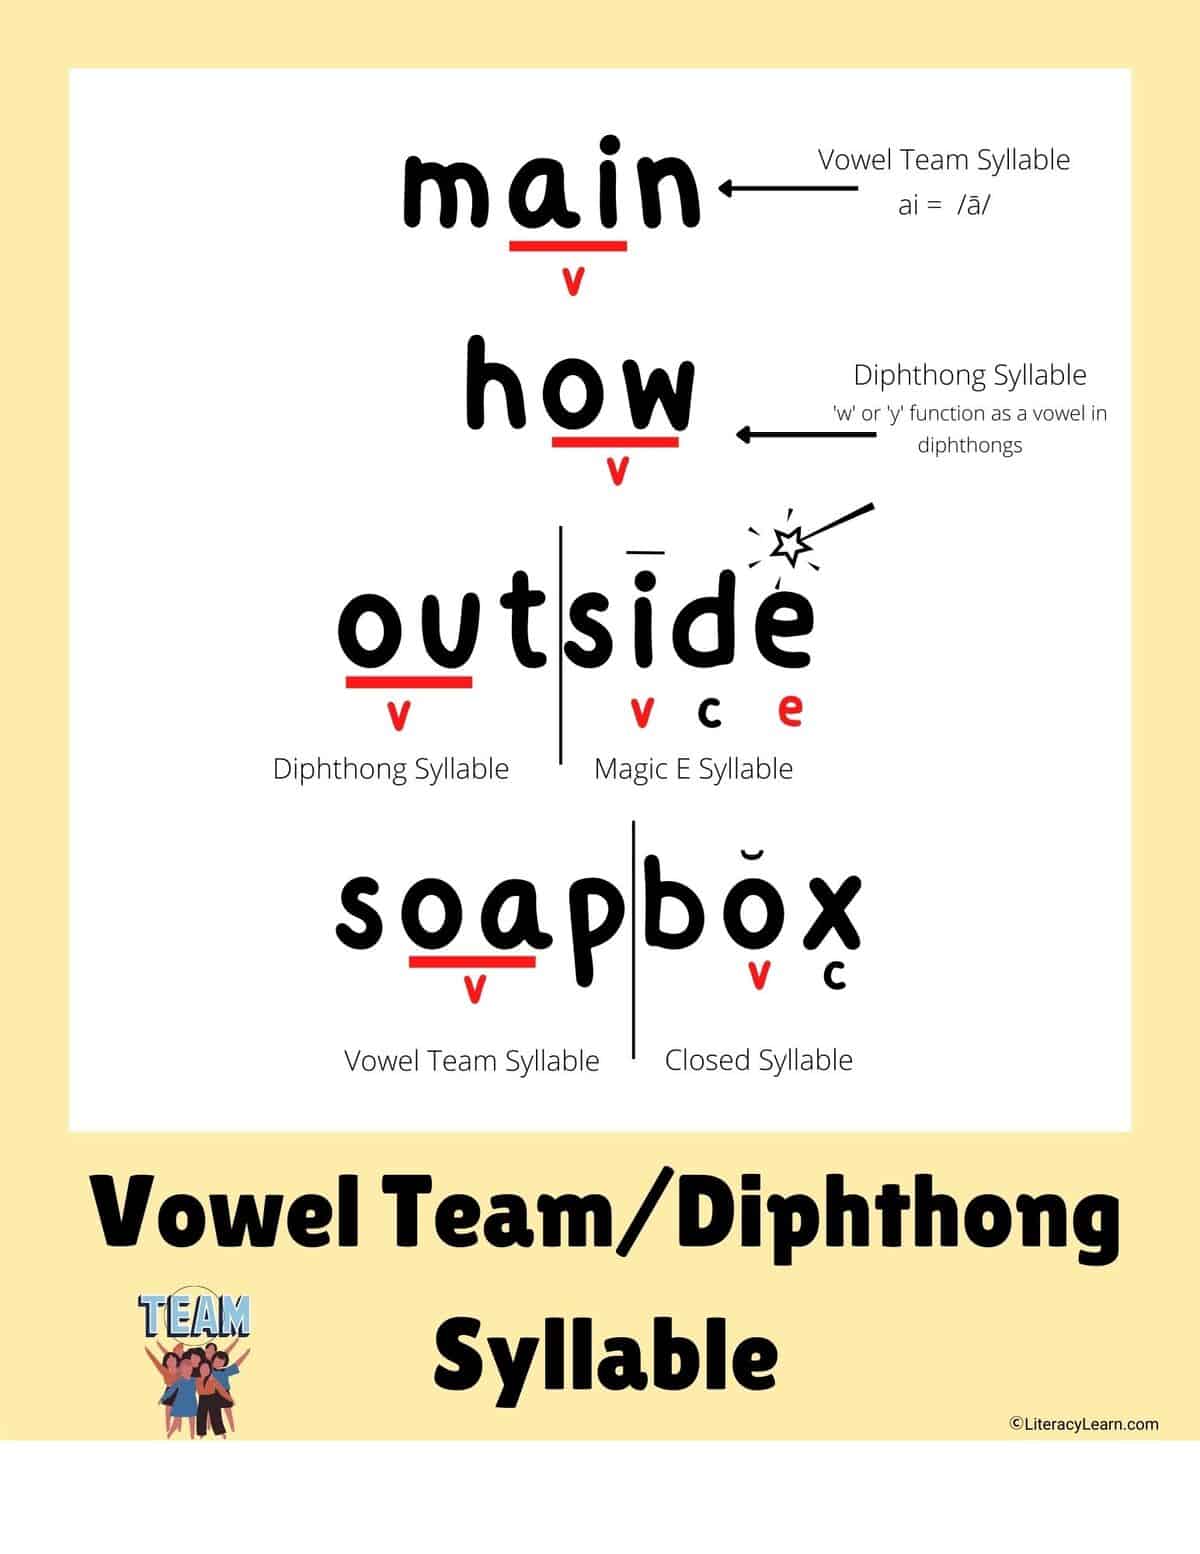 Graphic showing 4 words divided by syllables showing specific vowel team/diphthong syllables.